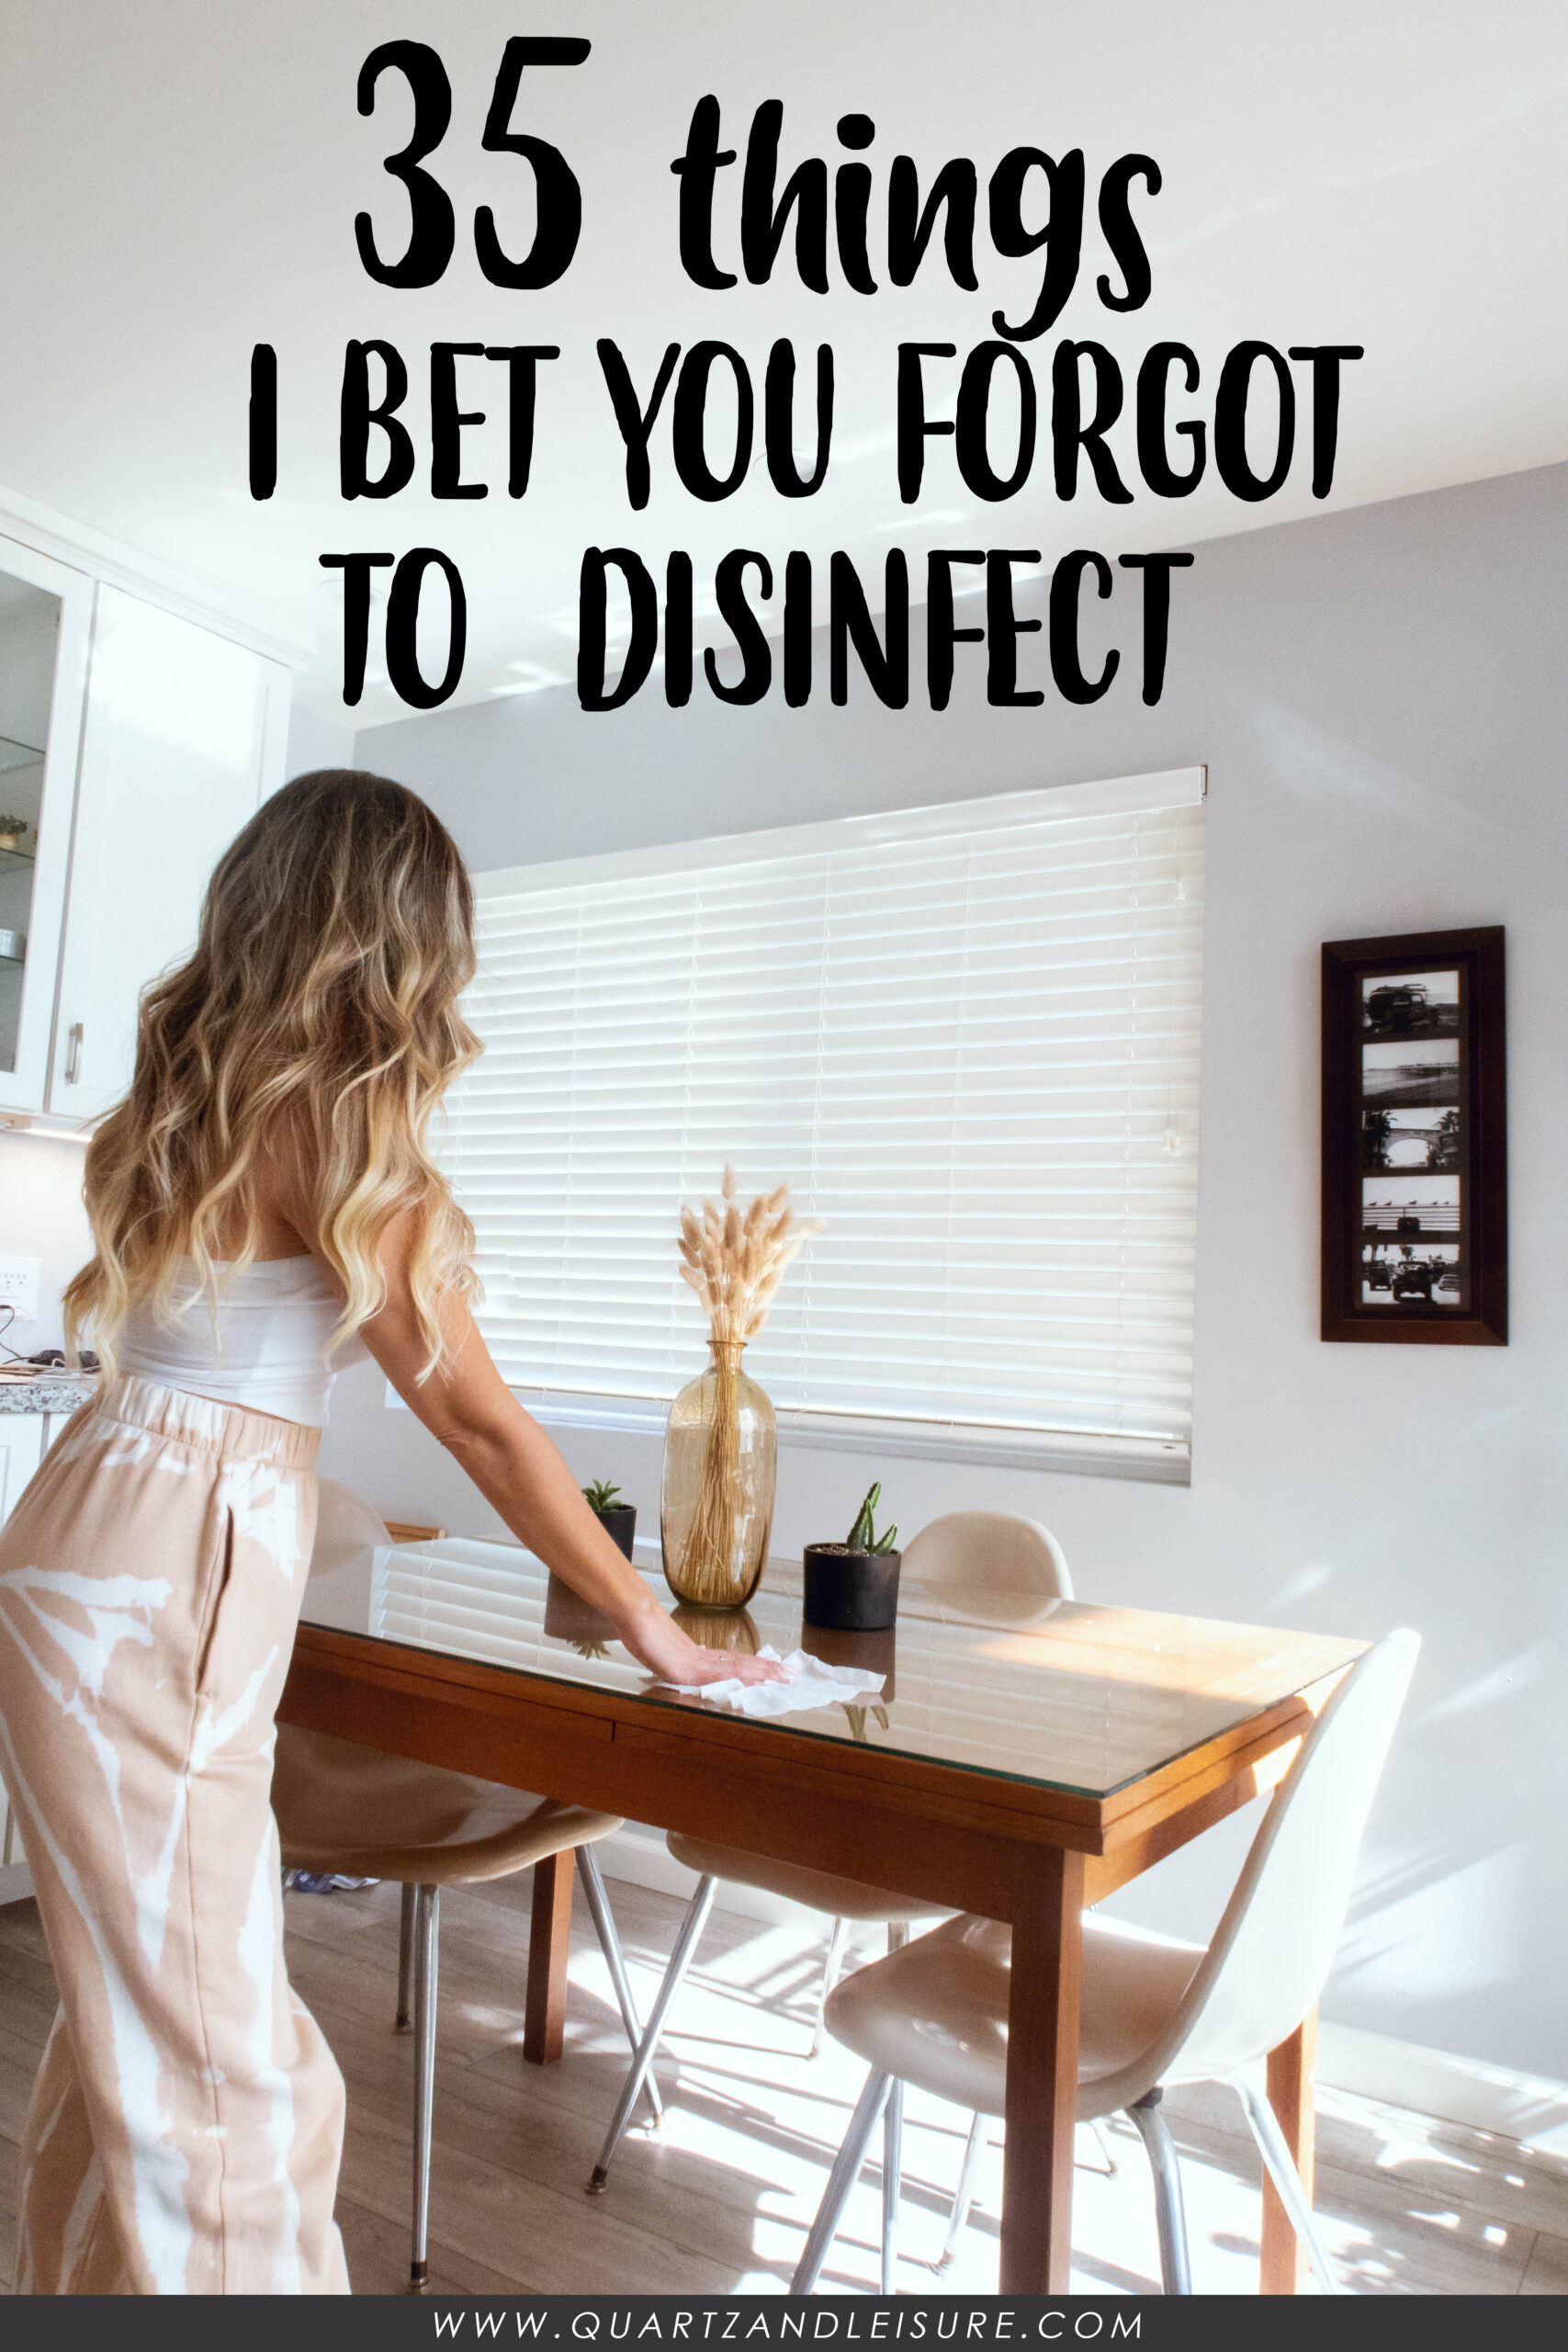 Things you forgot to disinfect